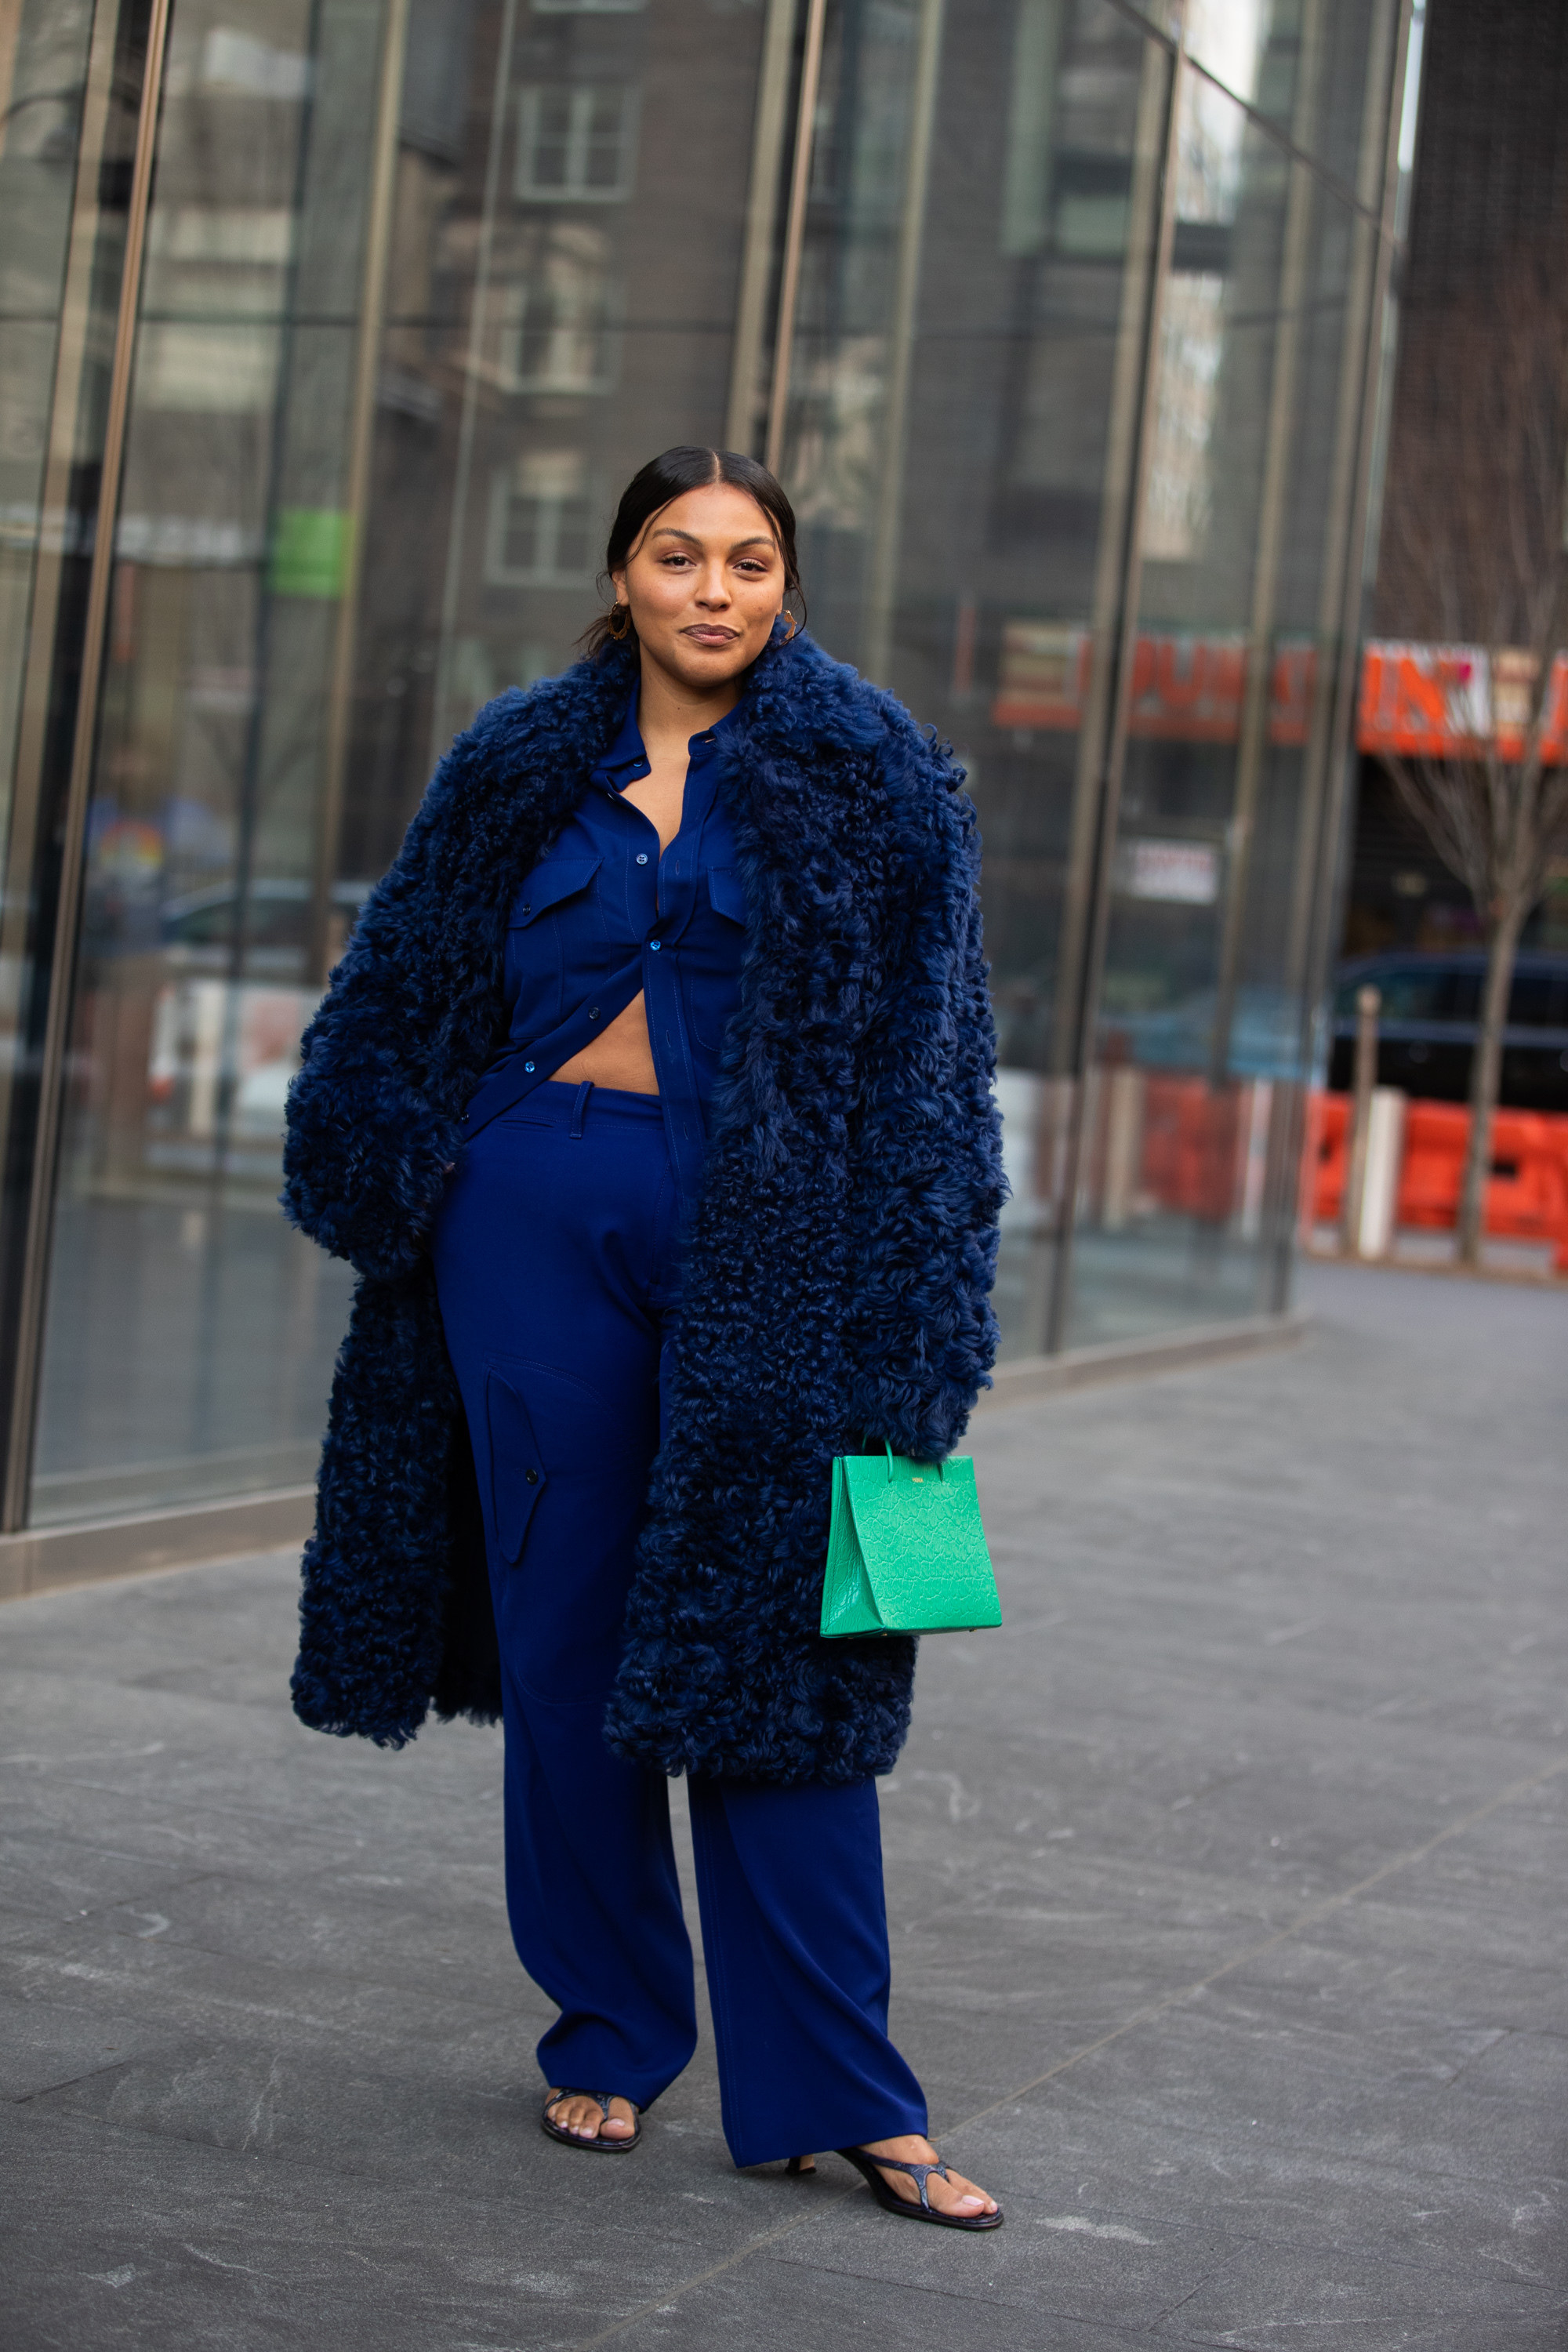 Paloma Elsesser in a blue suit and teddy bear style coat